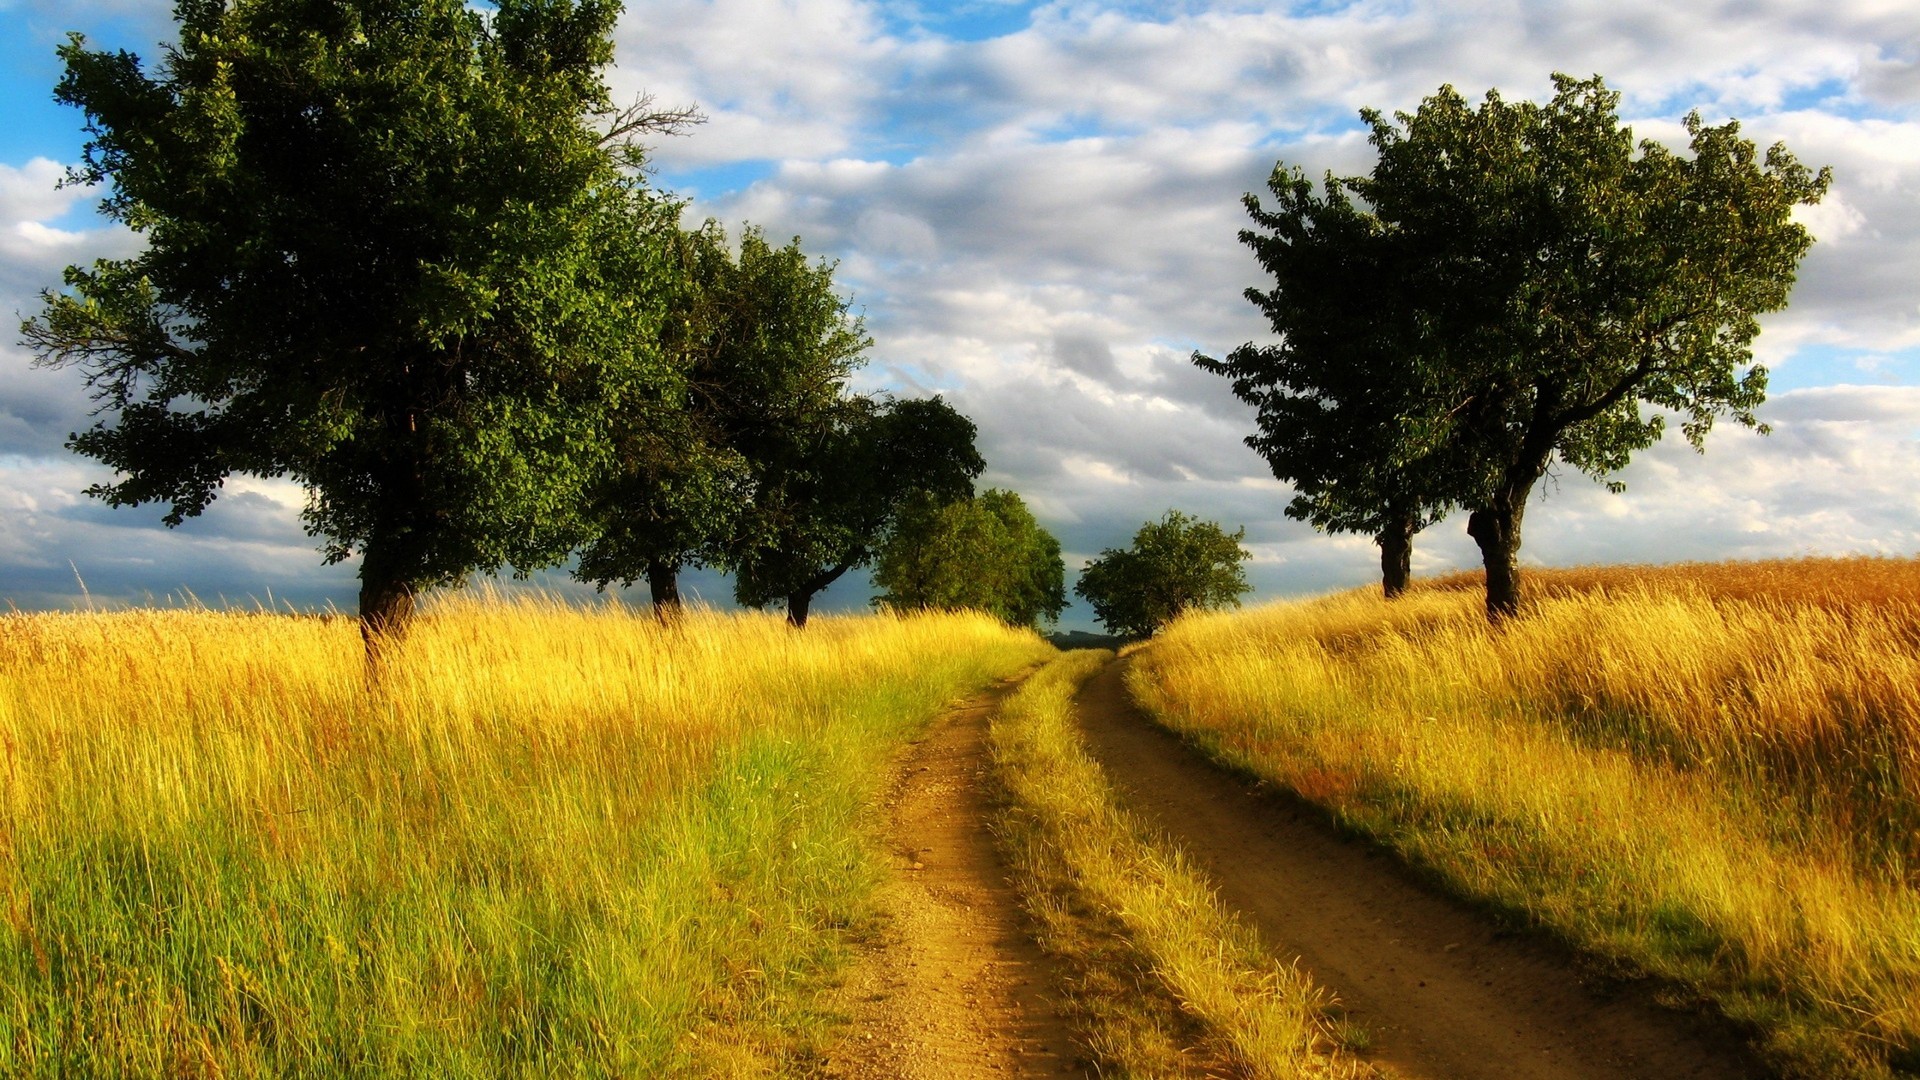 General 1920x1080 nature landscape dirt road trees wheat